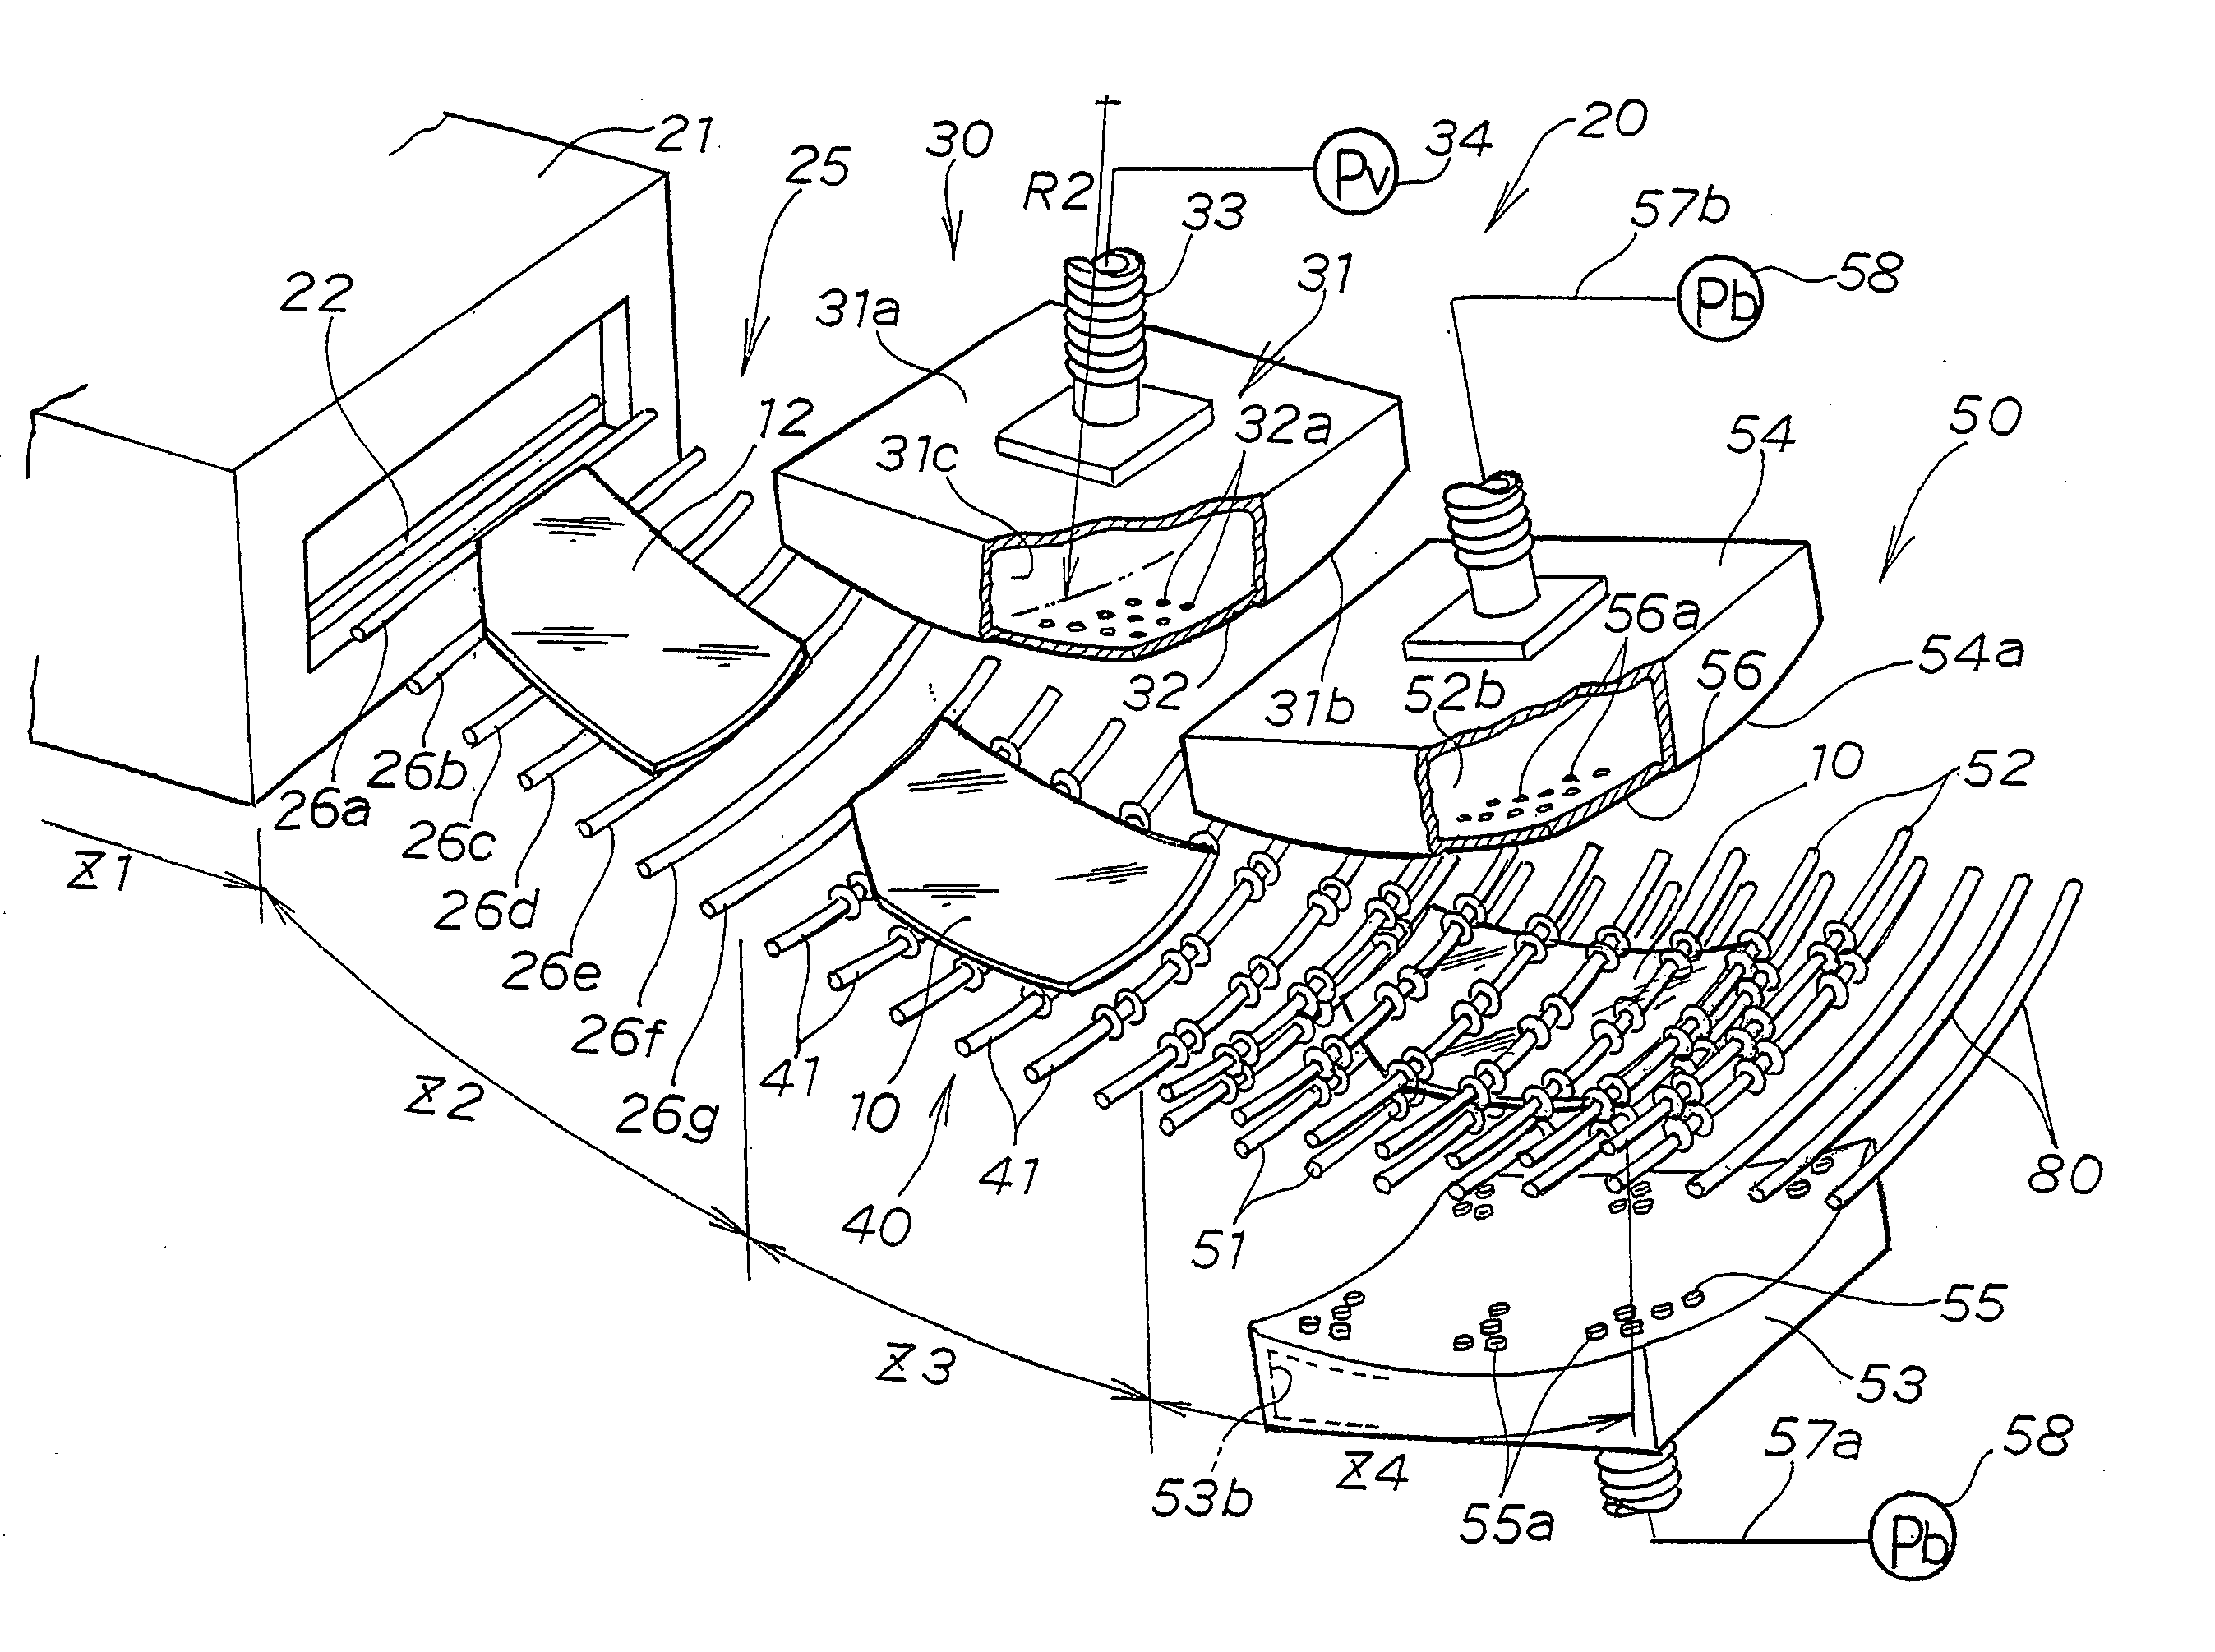 Apparatus and method for producing a bent glass sheet